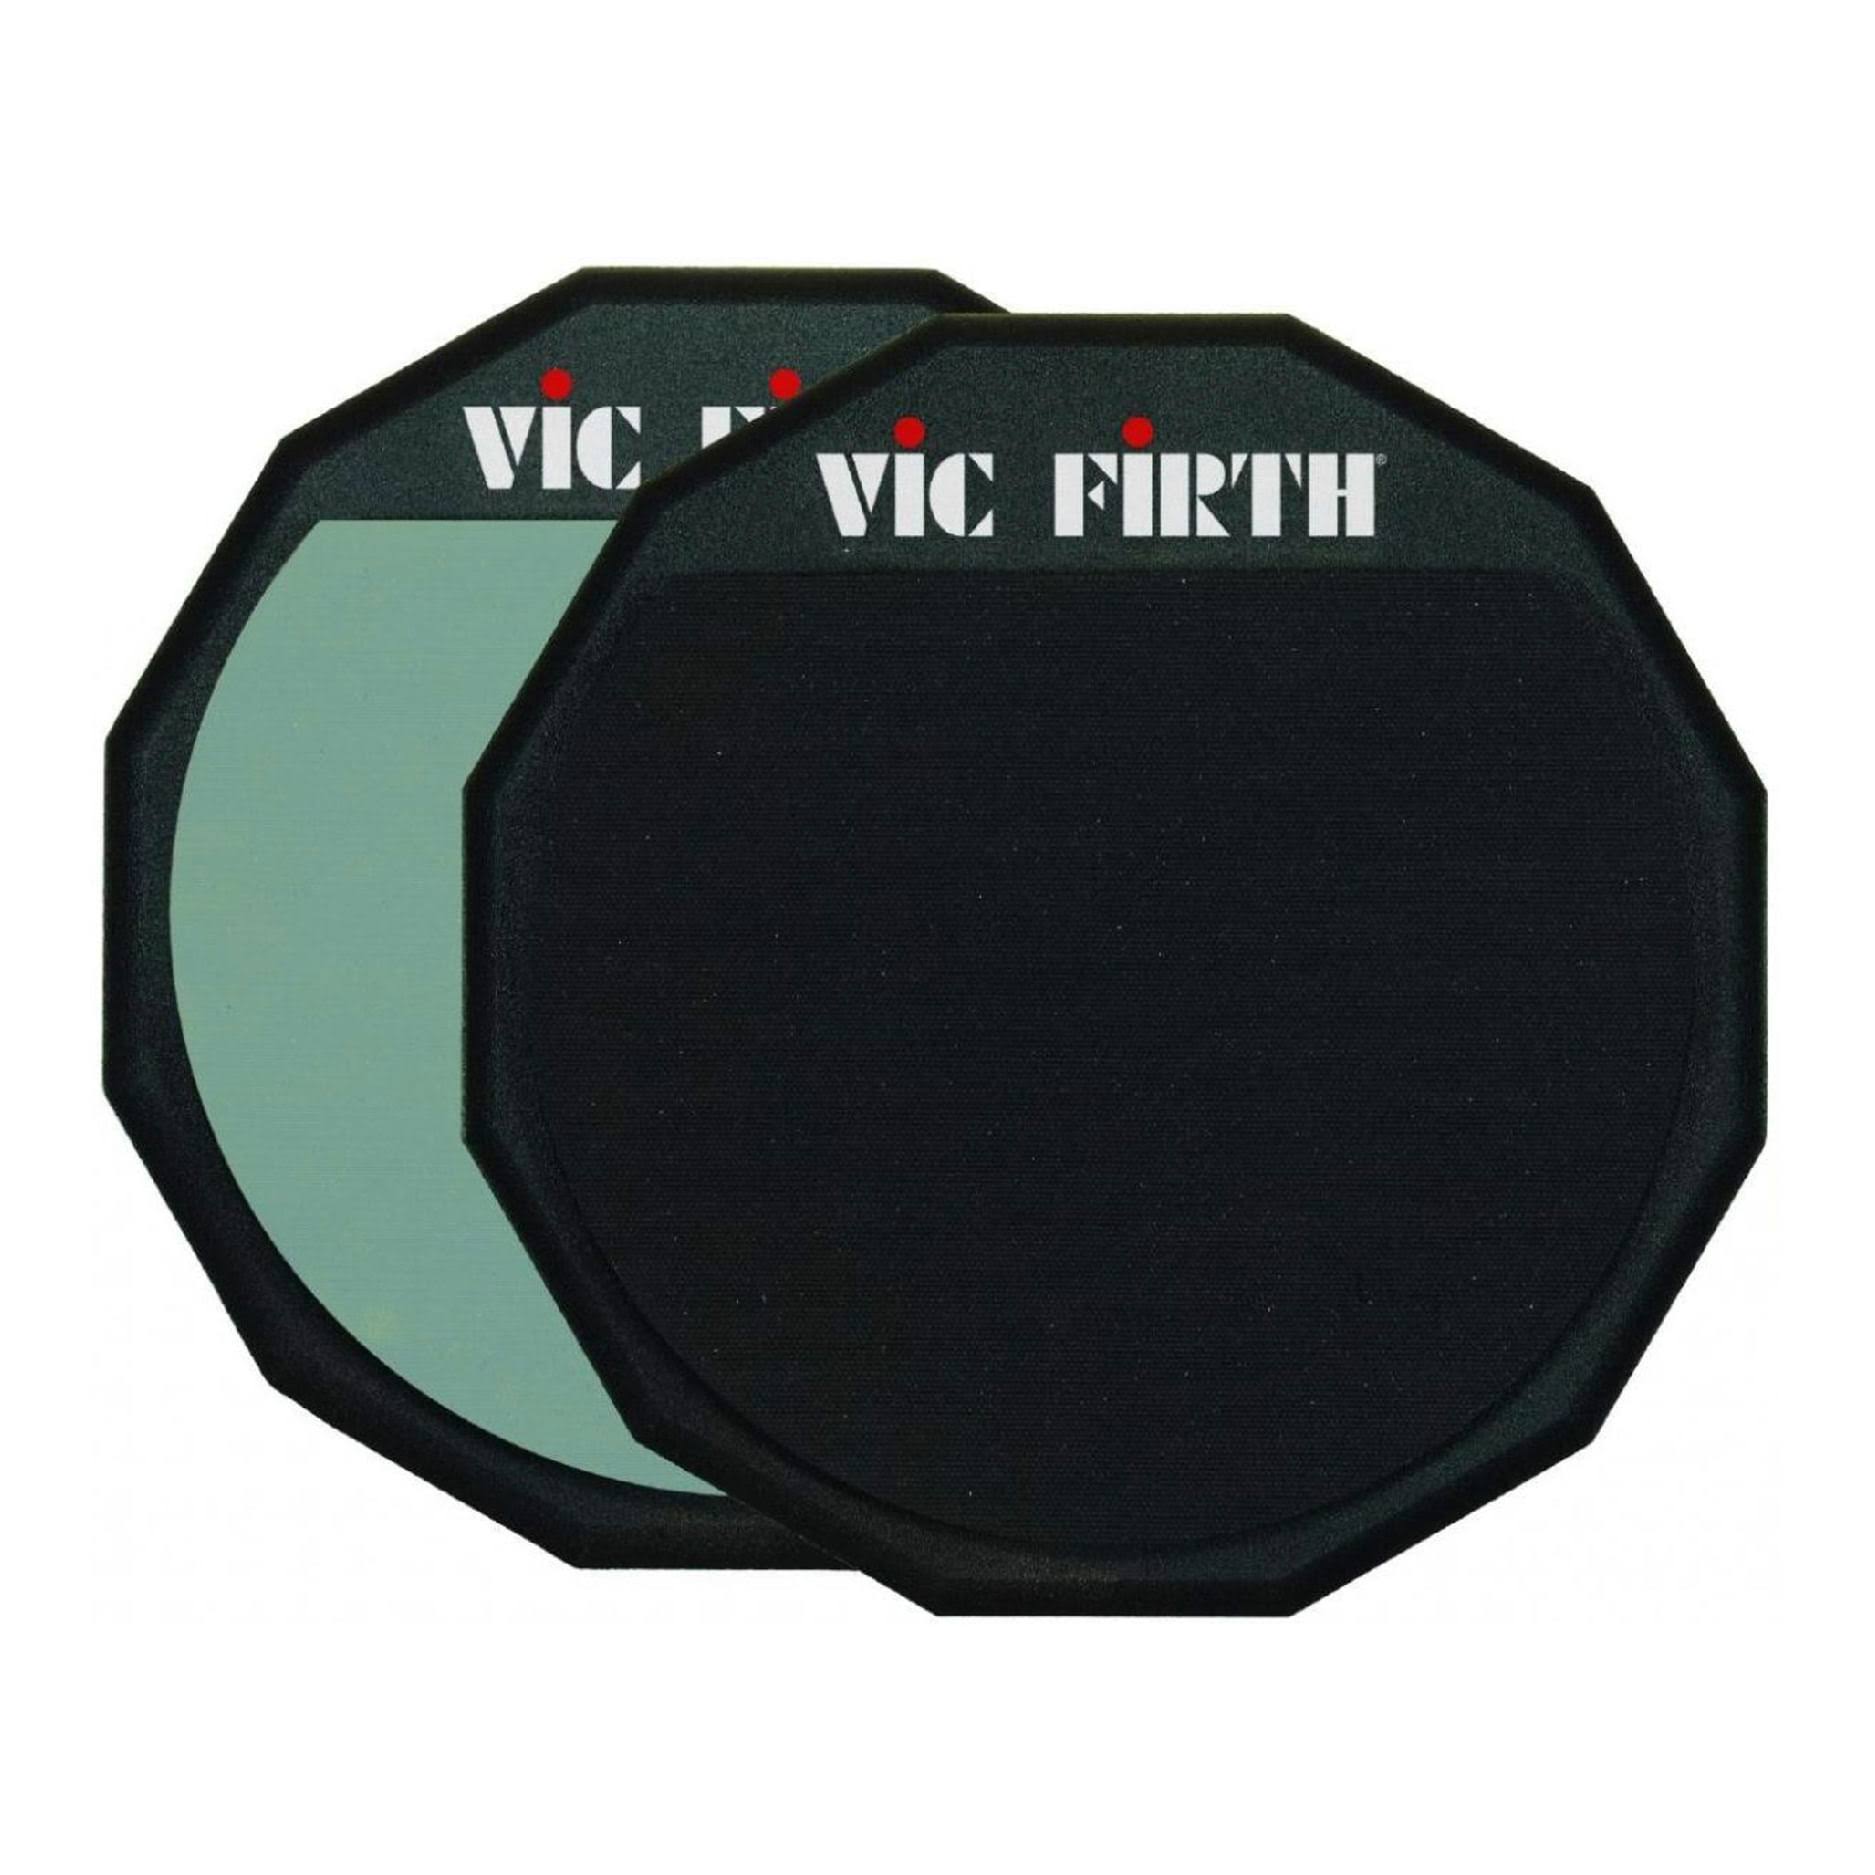 Vic Firth Double Sided Drum Practice Pad - 12"